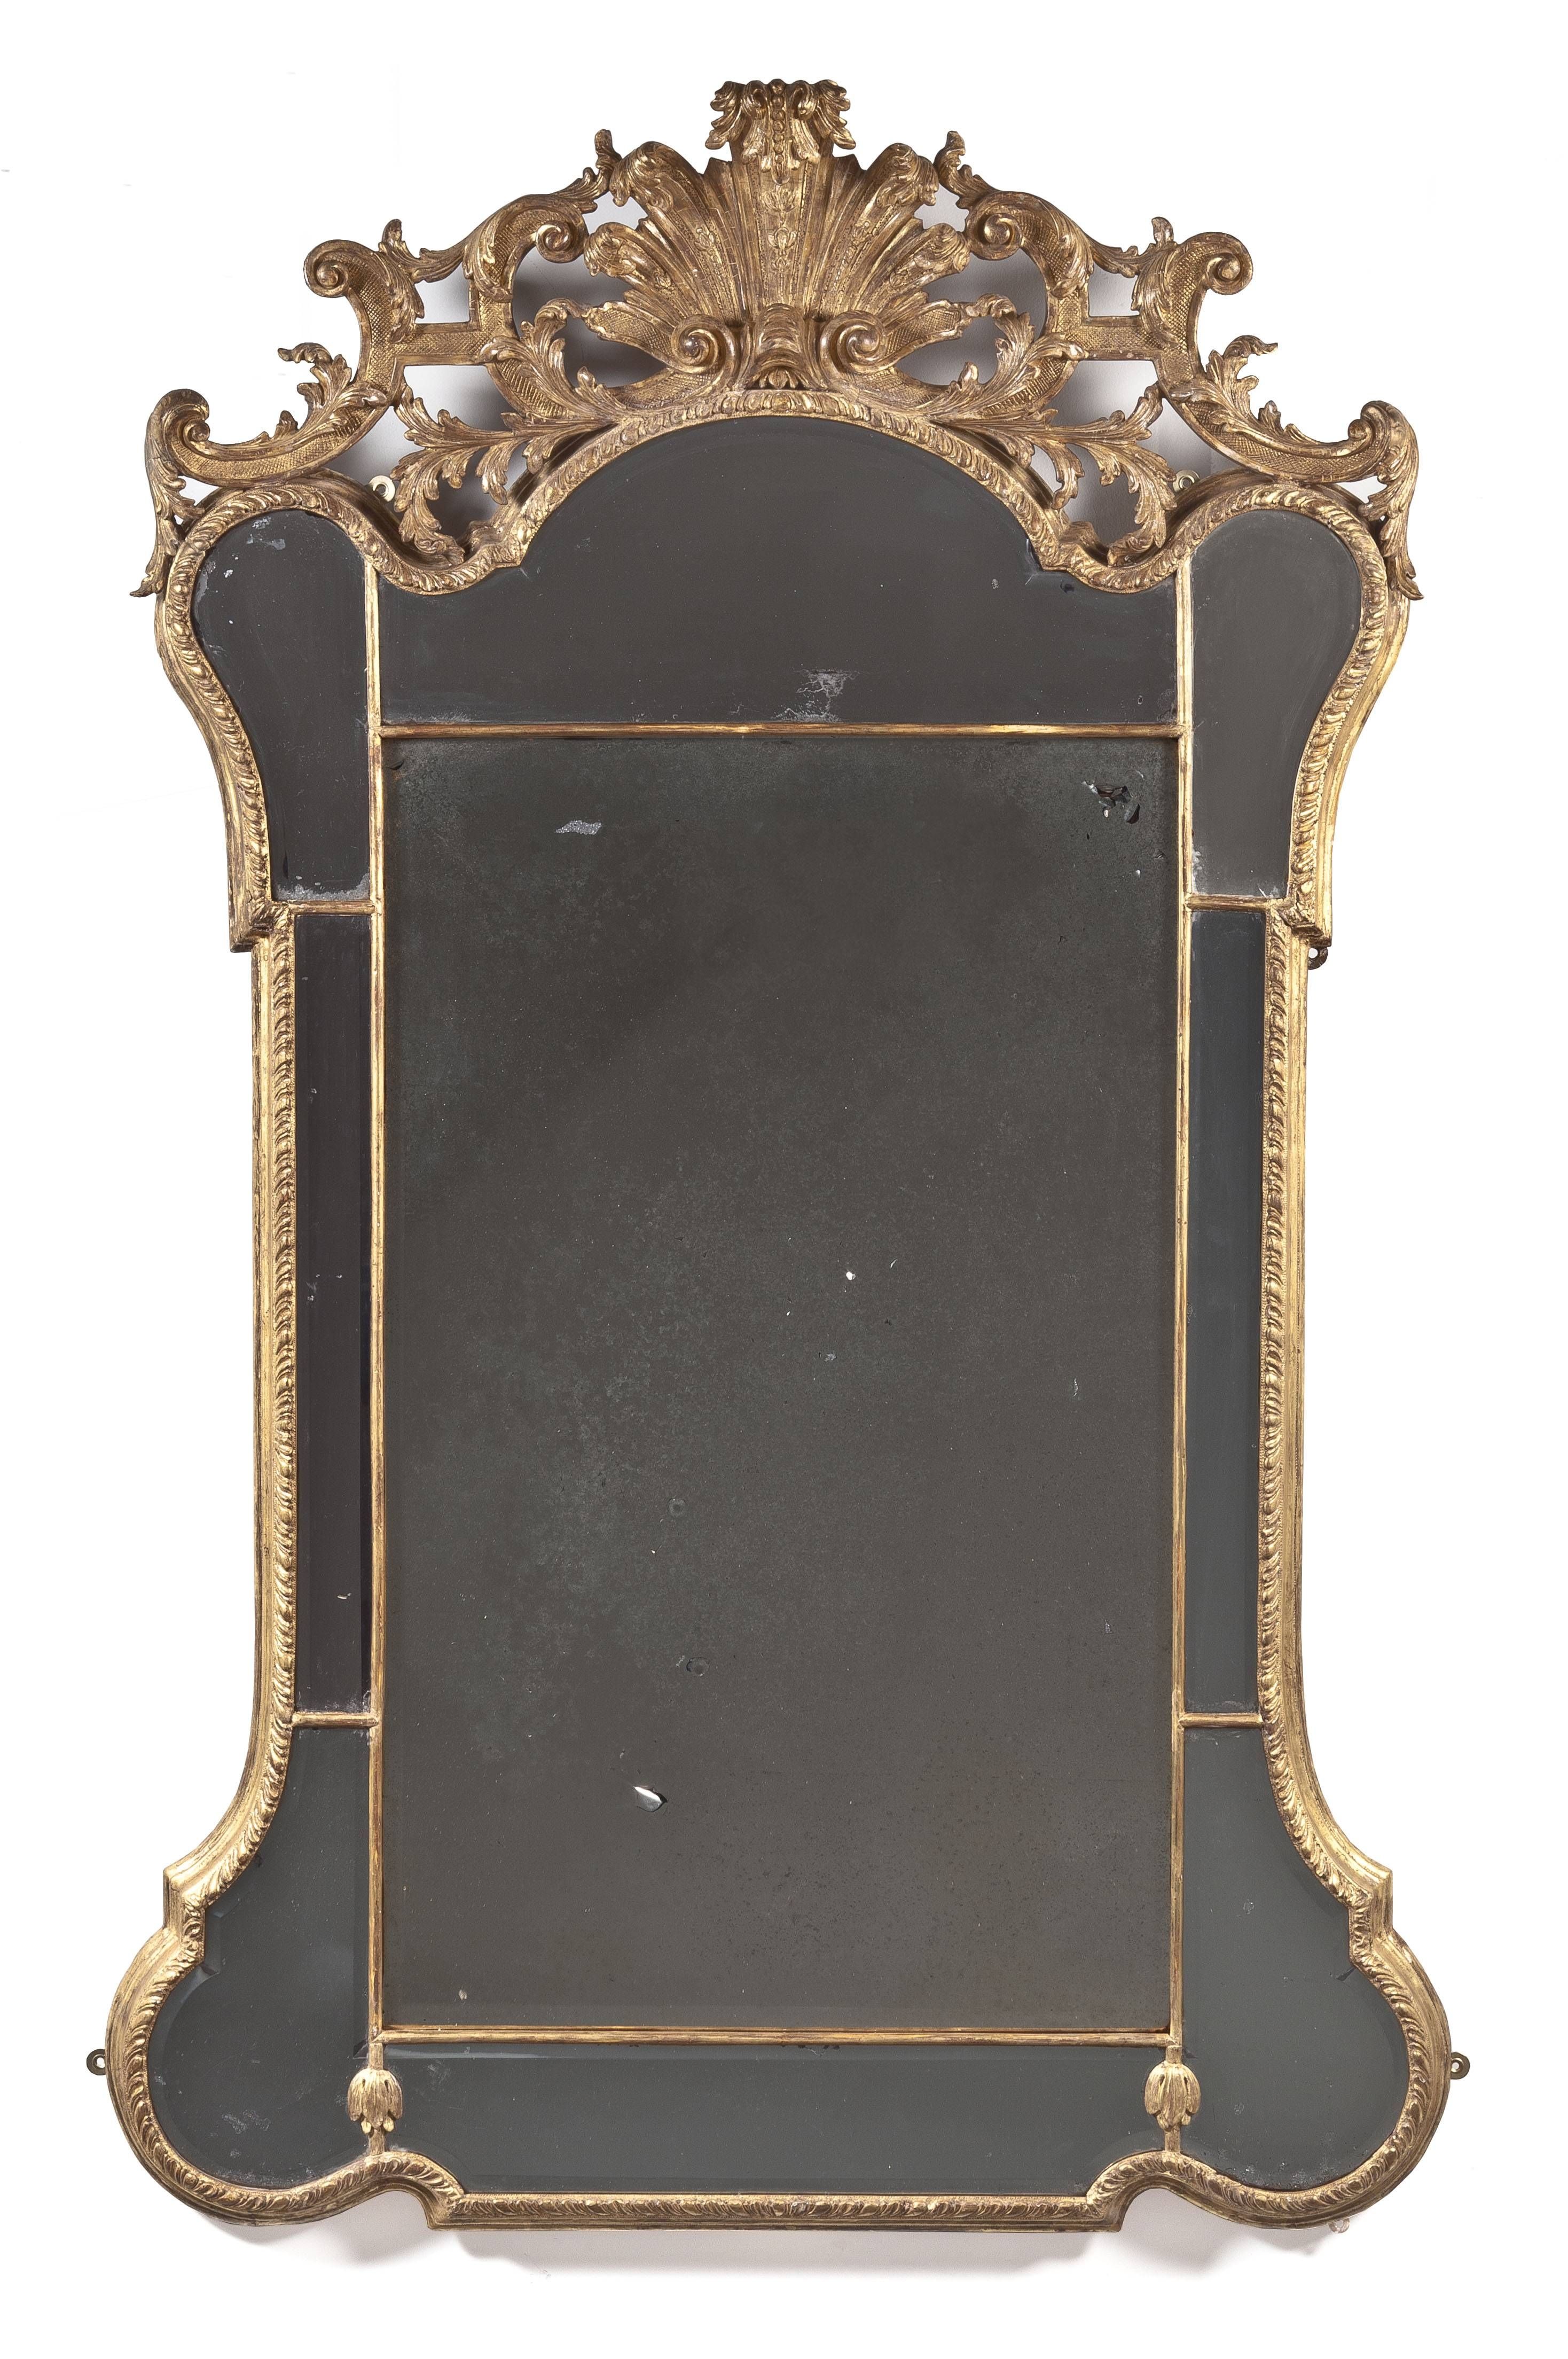 Large Baroque Mirror | Clinton Howell In Large Baroque Mirrors (View 5 of 25)